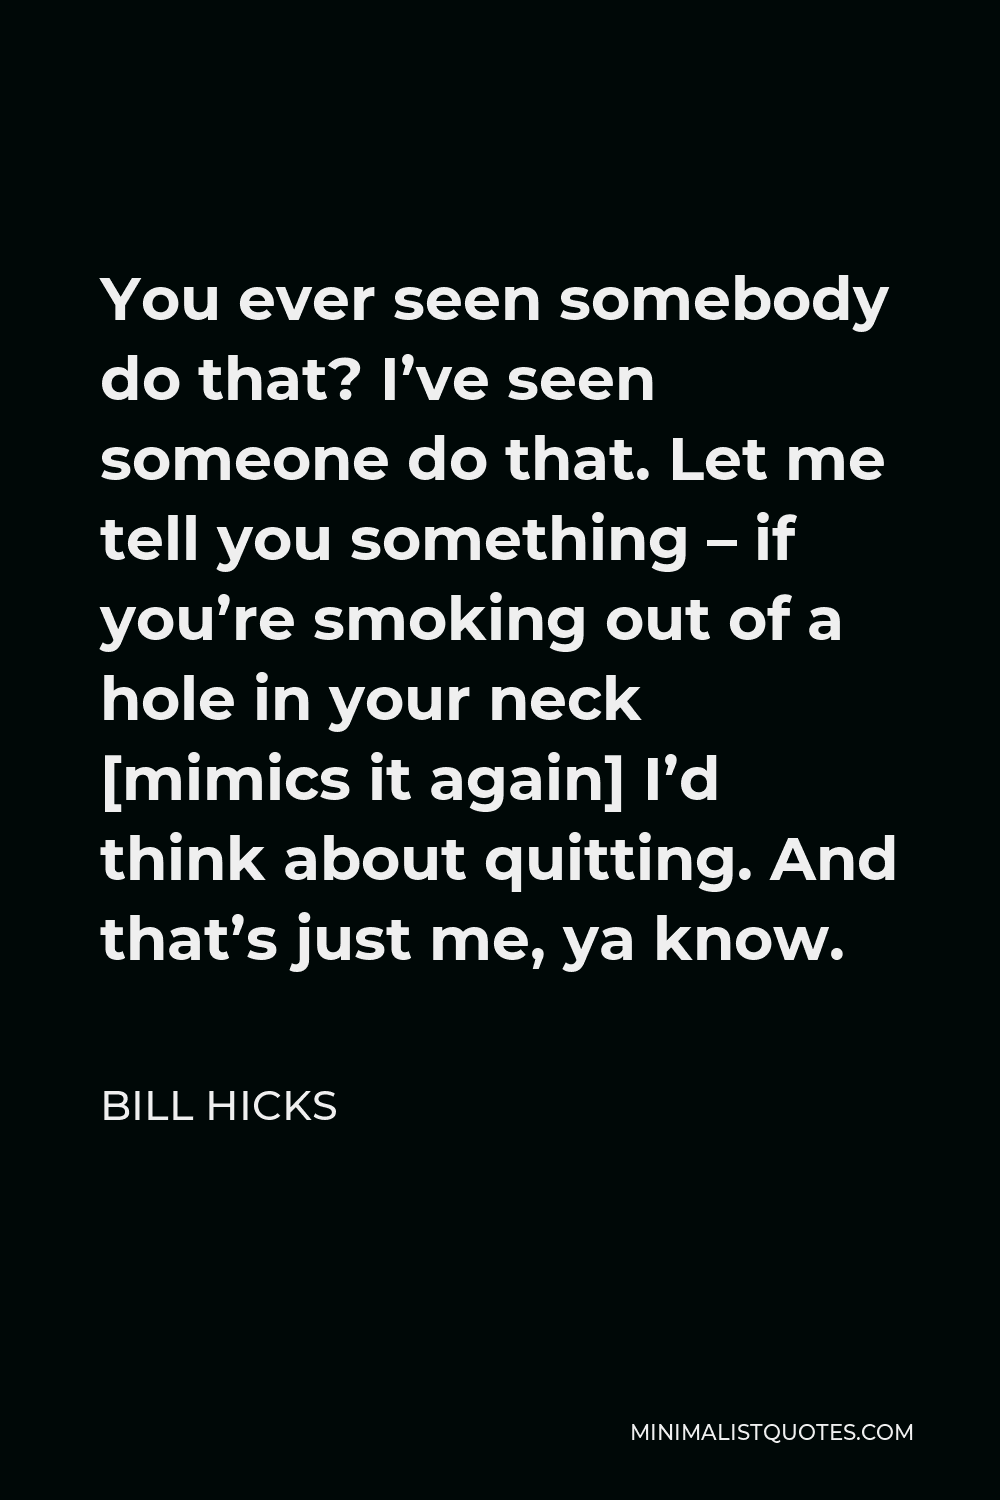 Bill Hicks Quote - You ever seen somebody do that? I’ve seen someone do that. Let me tell you something – if you’re smoking out of a hole in your neck [mimics it again] I’d think about quitting. And that’s just me, ya know.